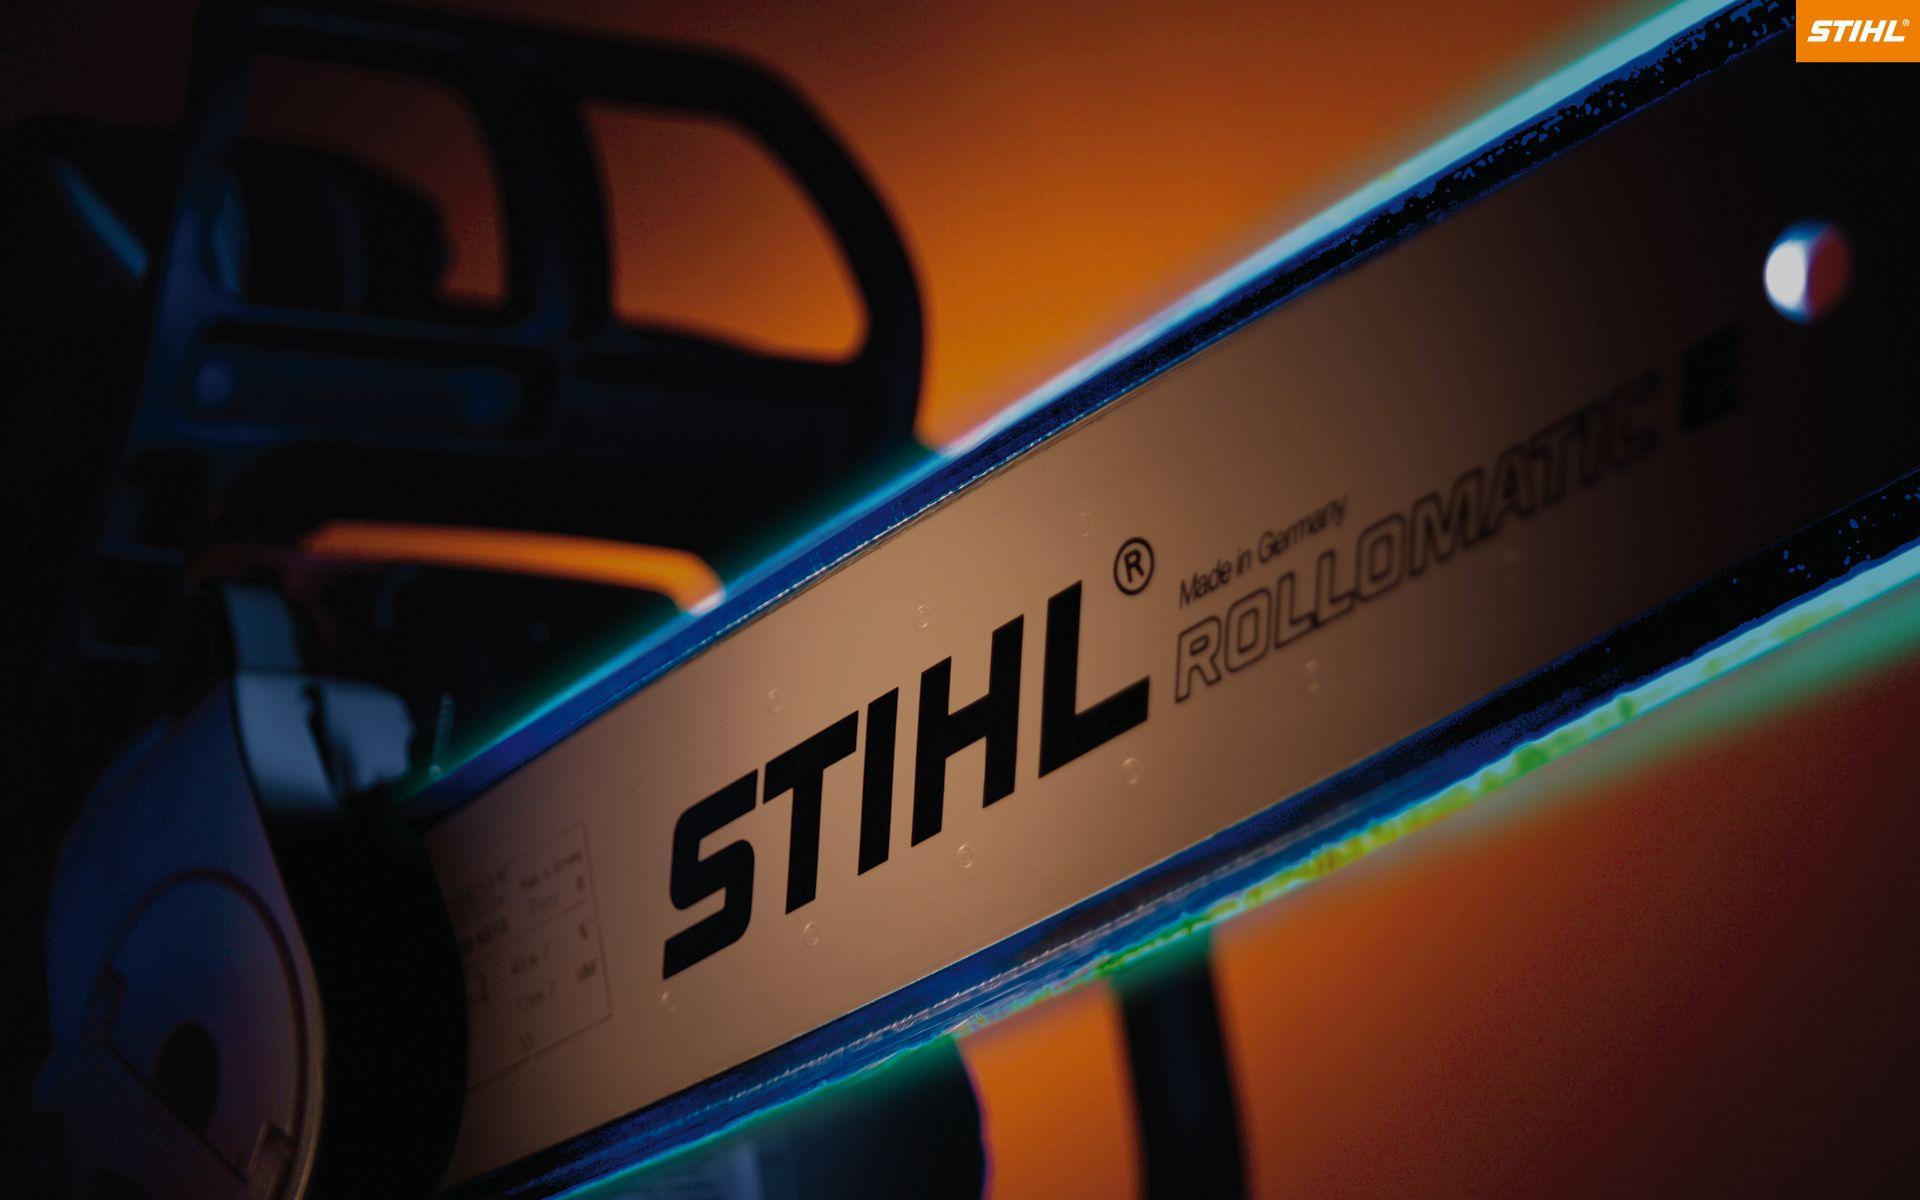 Stihl Logo - Our Wallpaper for more STIHL on your screen